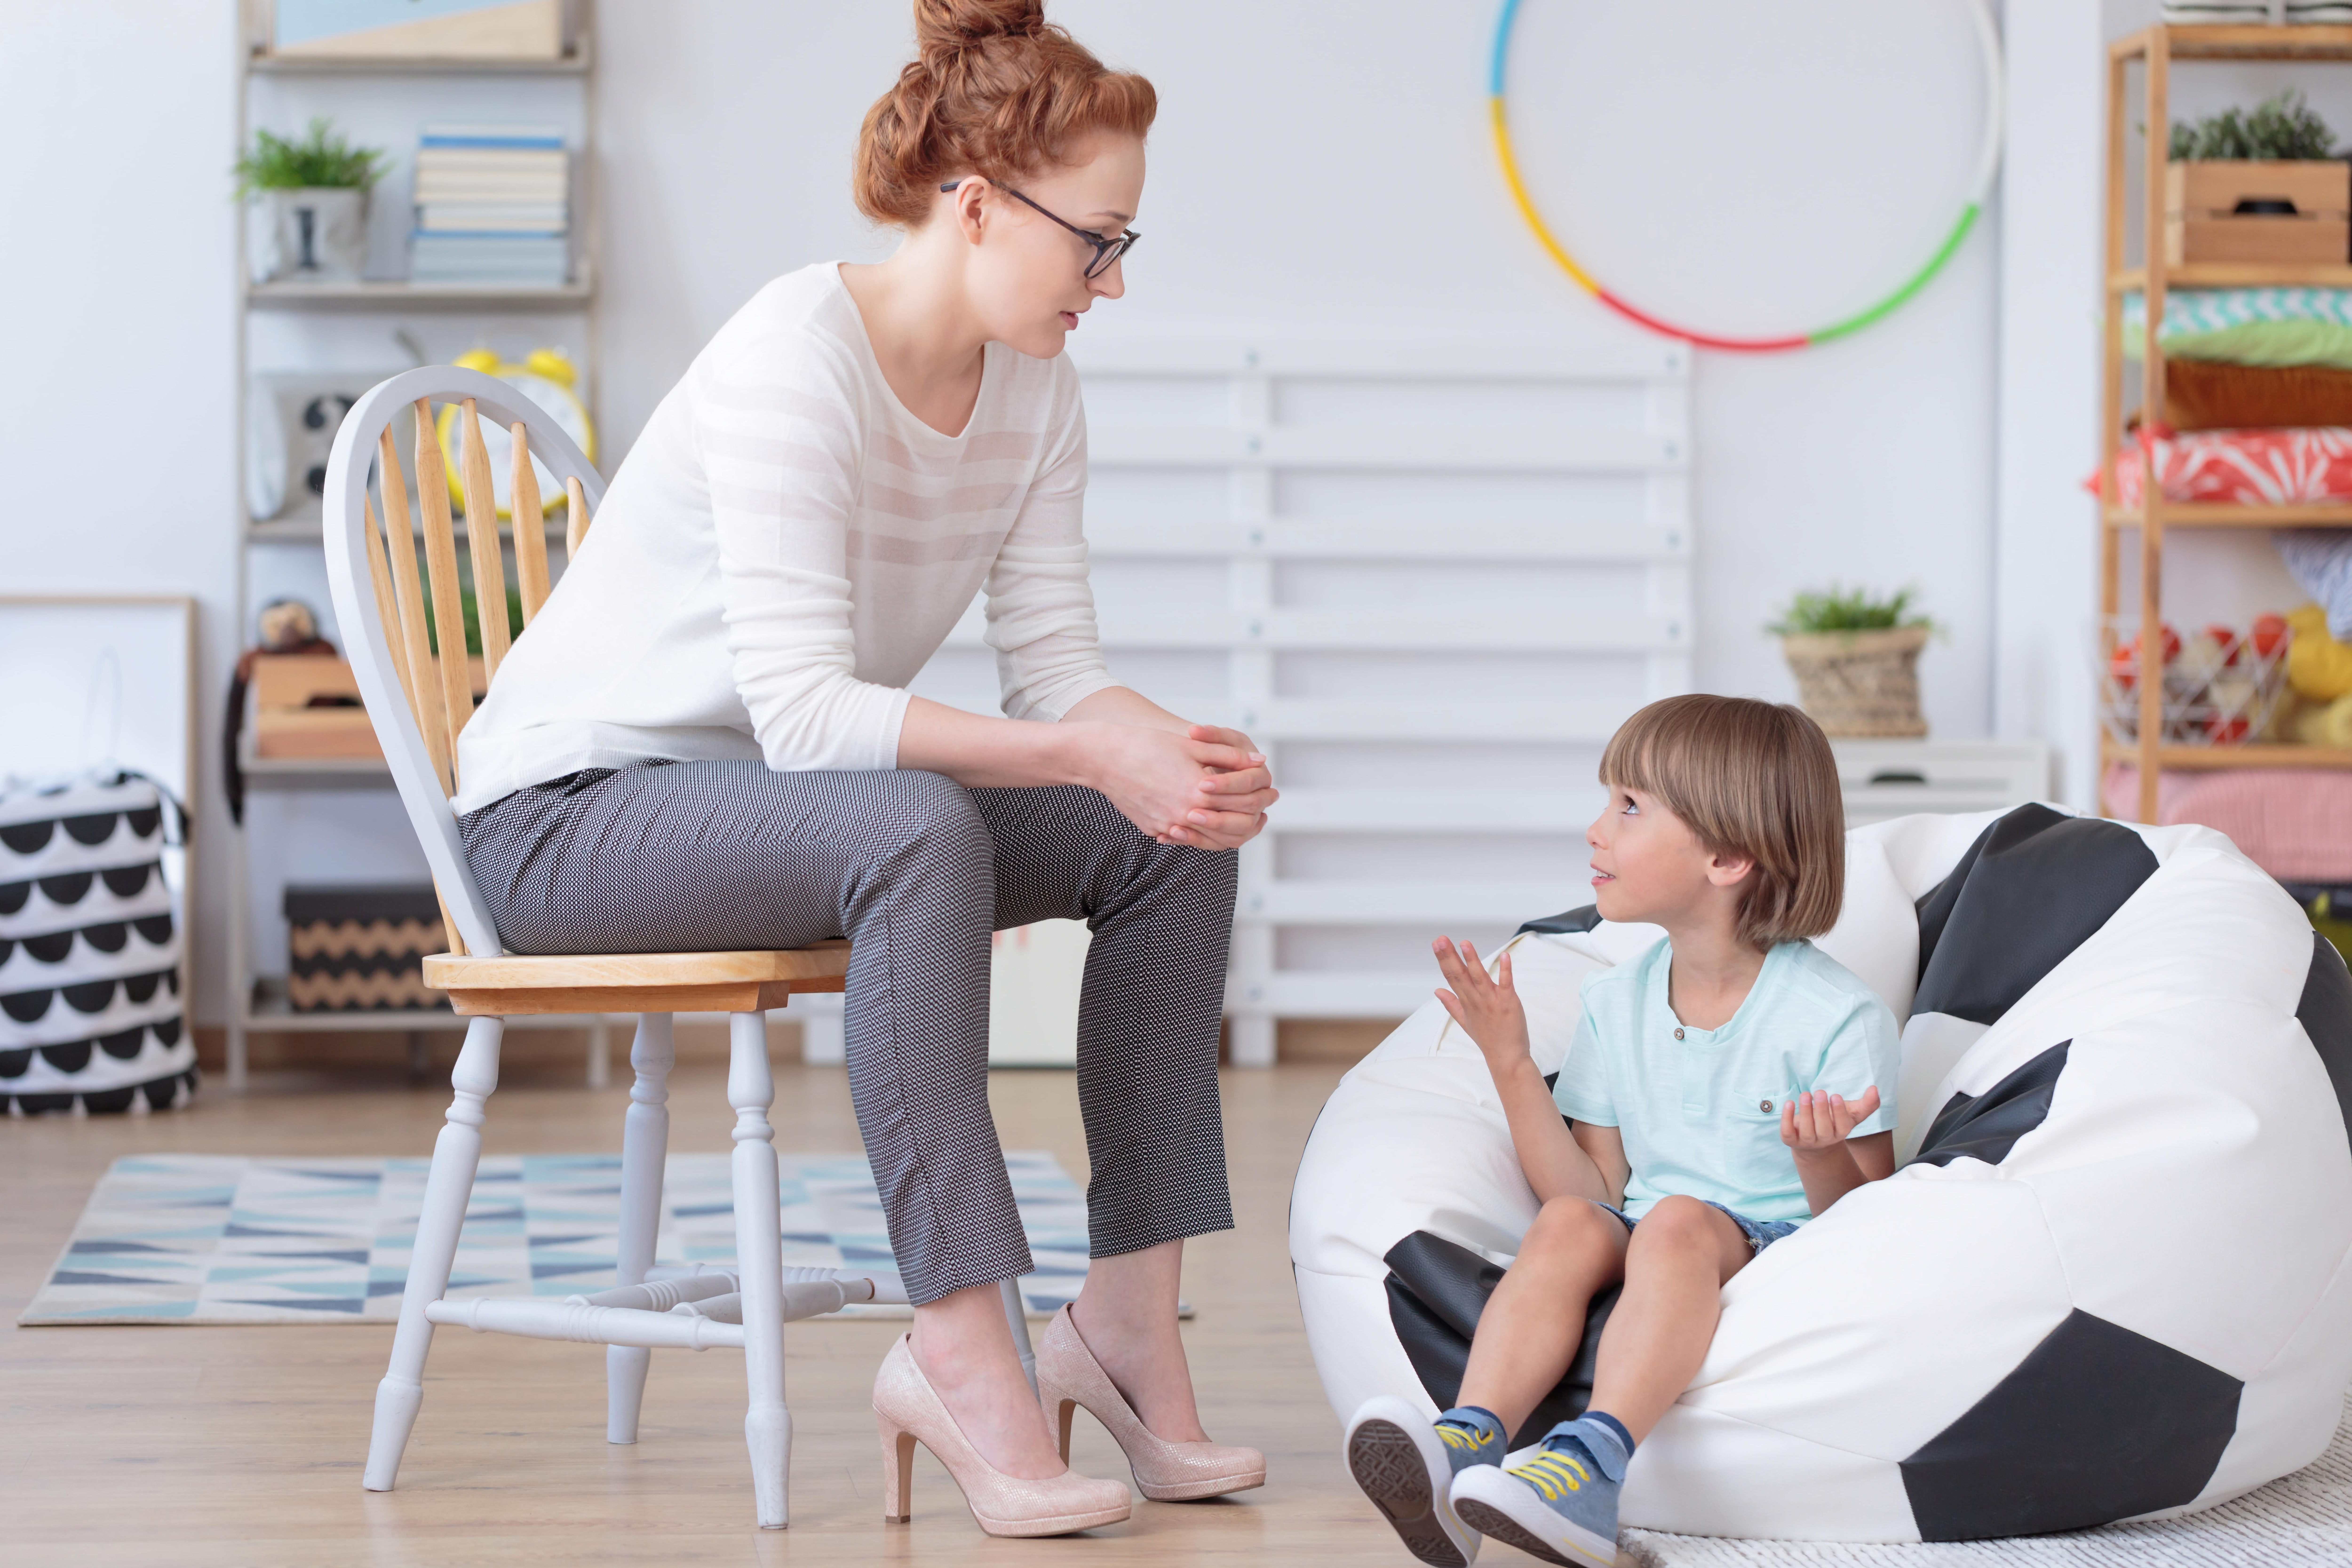 A child talking with a counselor